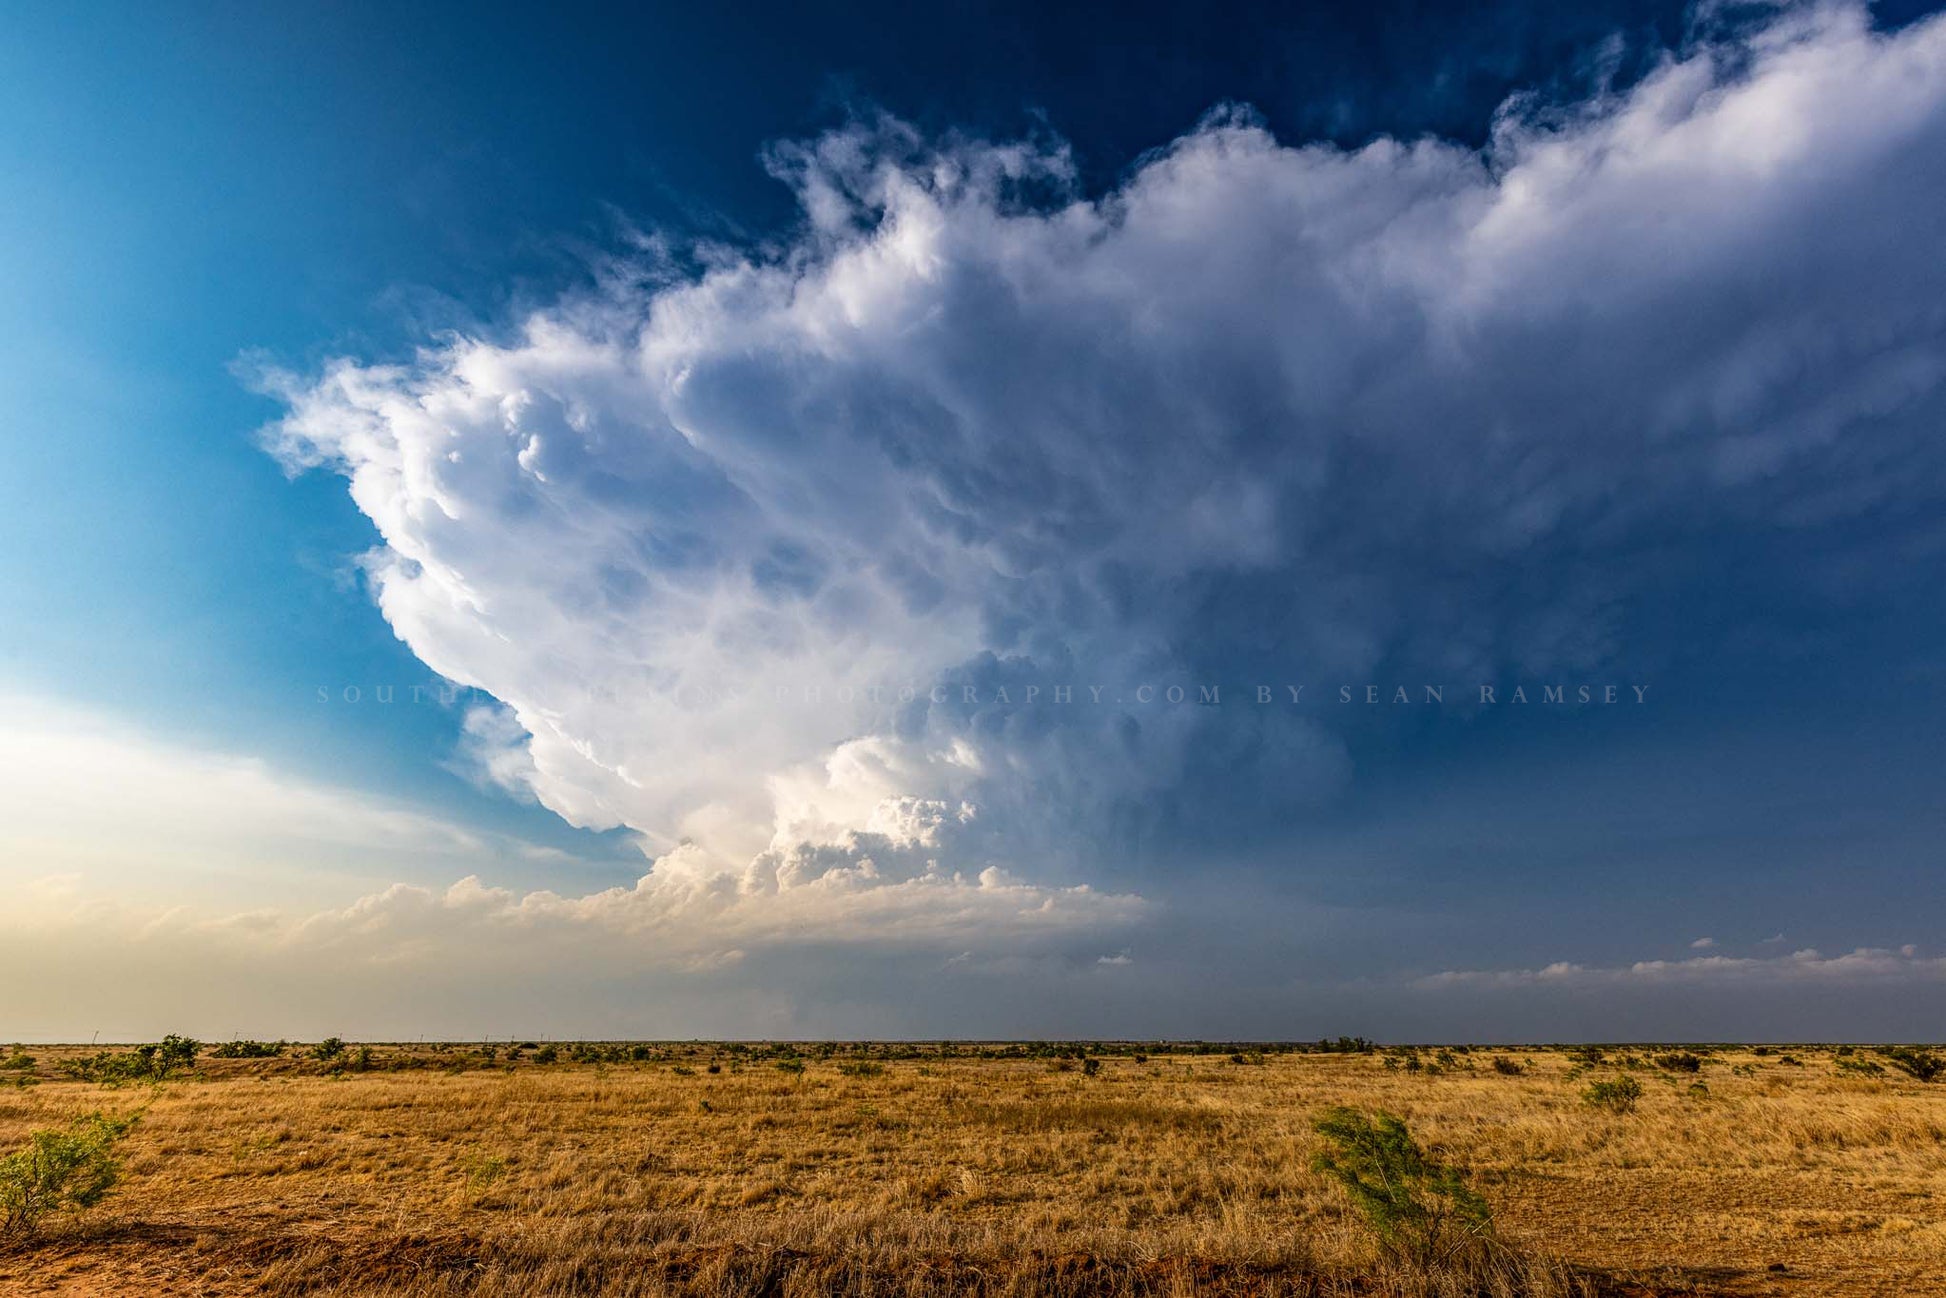 A supercell thunderstorm mesocyclone climbs high into the sky on a stormy spring day on the plains of Texas by Sean Ramsey of Southern Plains Photography.